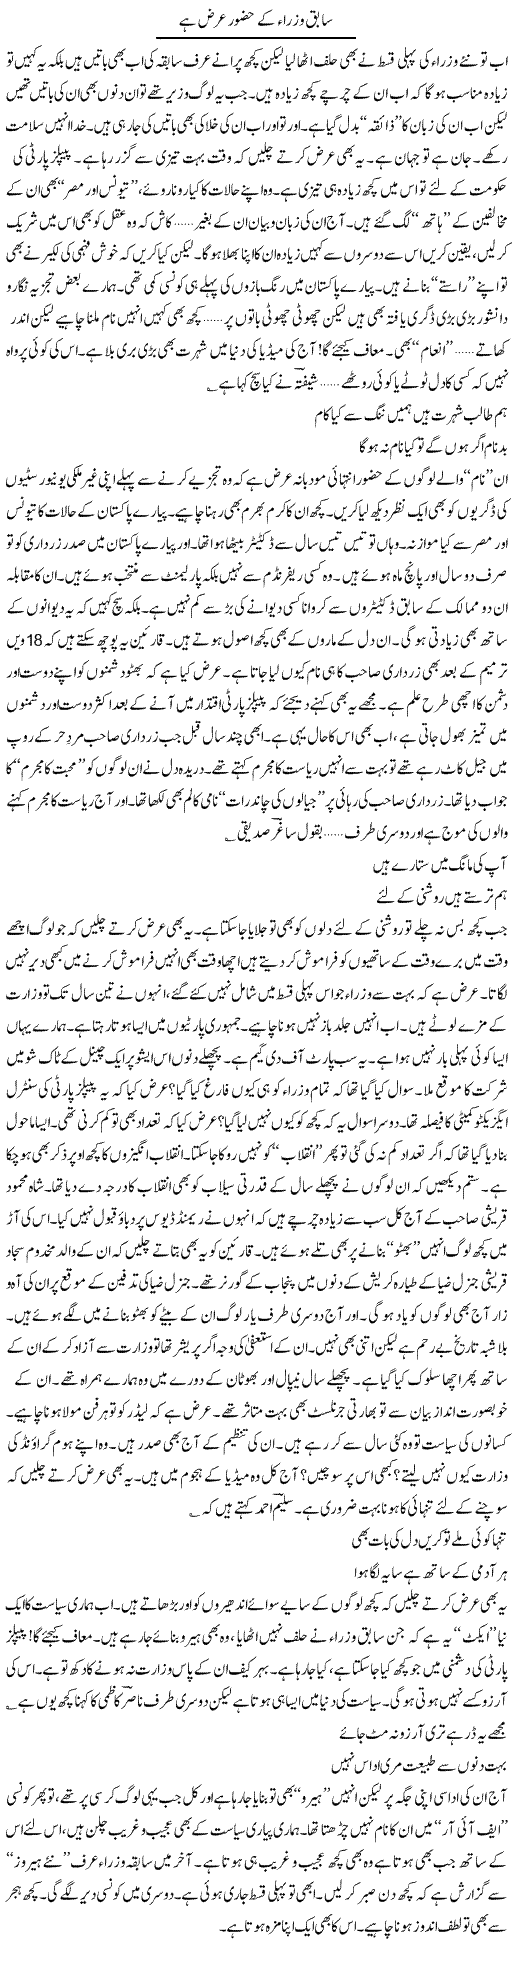 Request To Ex-Ministers Express Column Ijaz Hafeez 15 February 2011